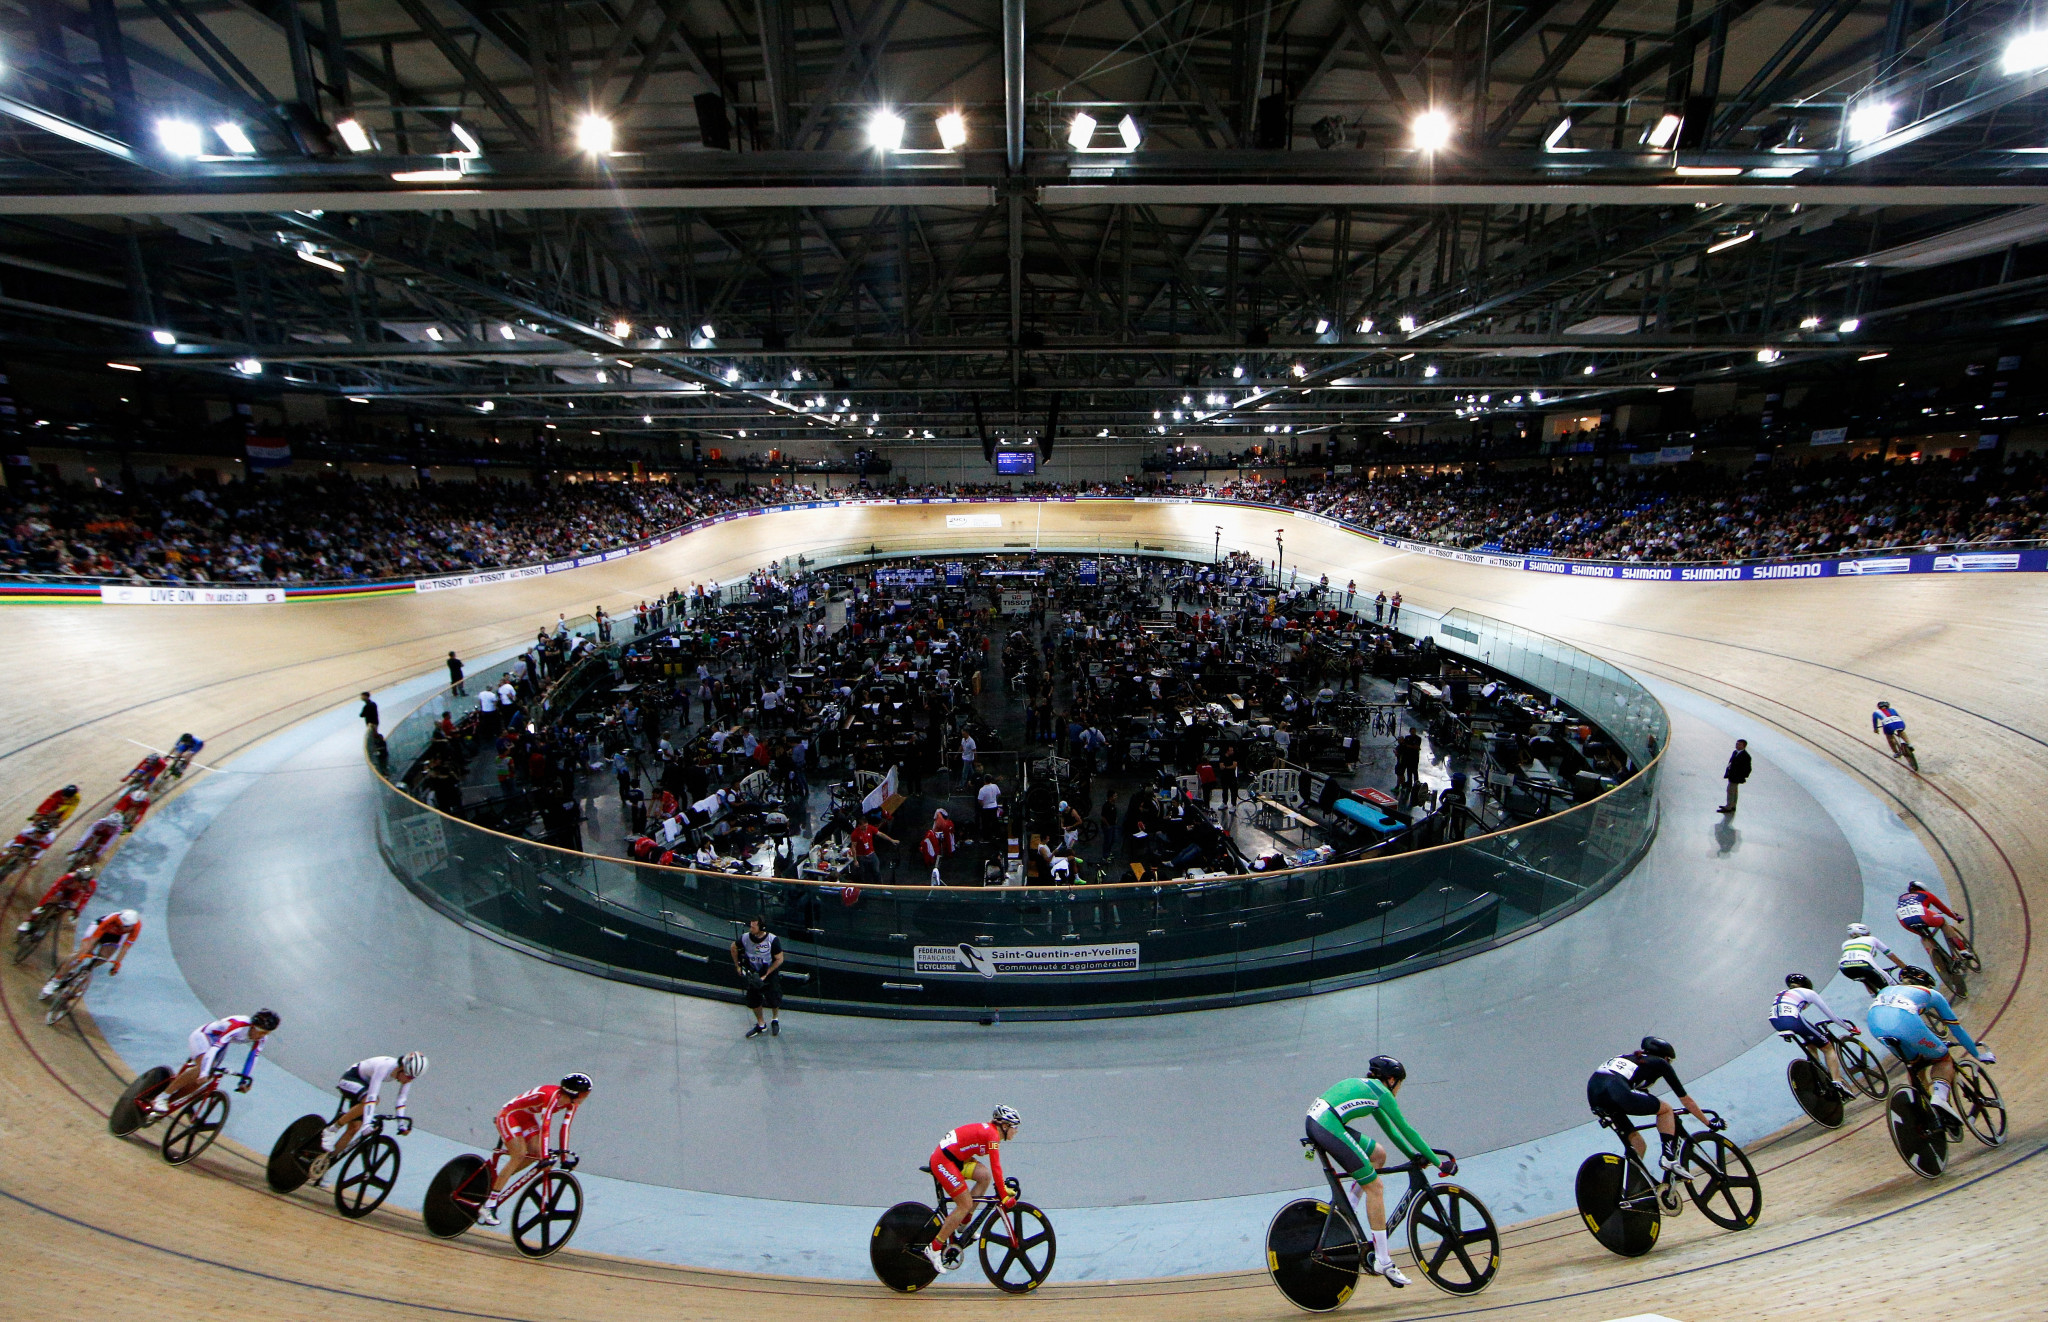 France last hosted the UCI Track Cycling World Championships in 2015 in Saint-Quentin-en-Yvelines, which will also host next year's edition of the event ©Getty Images